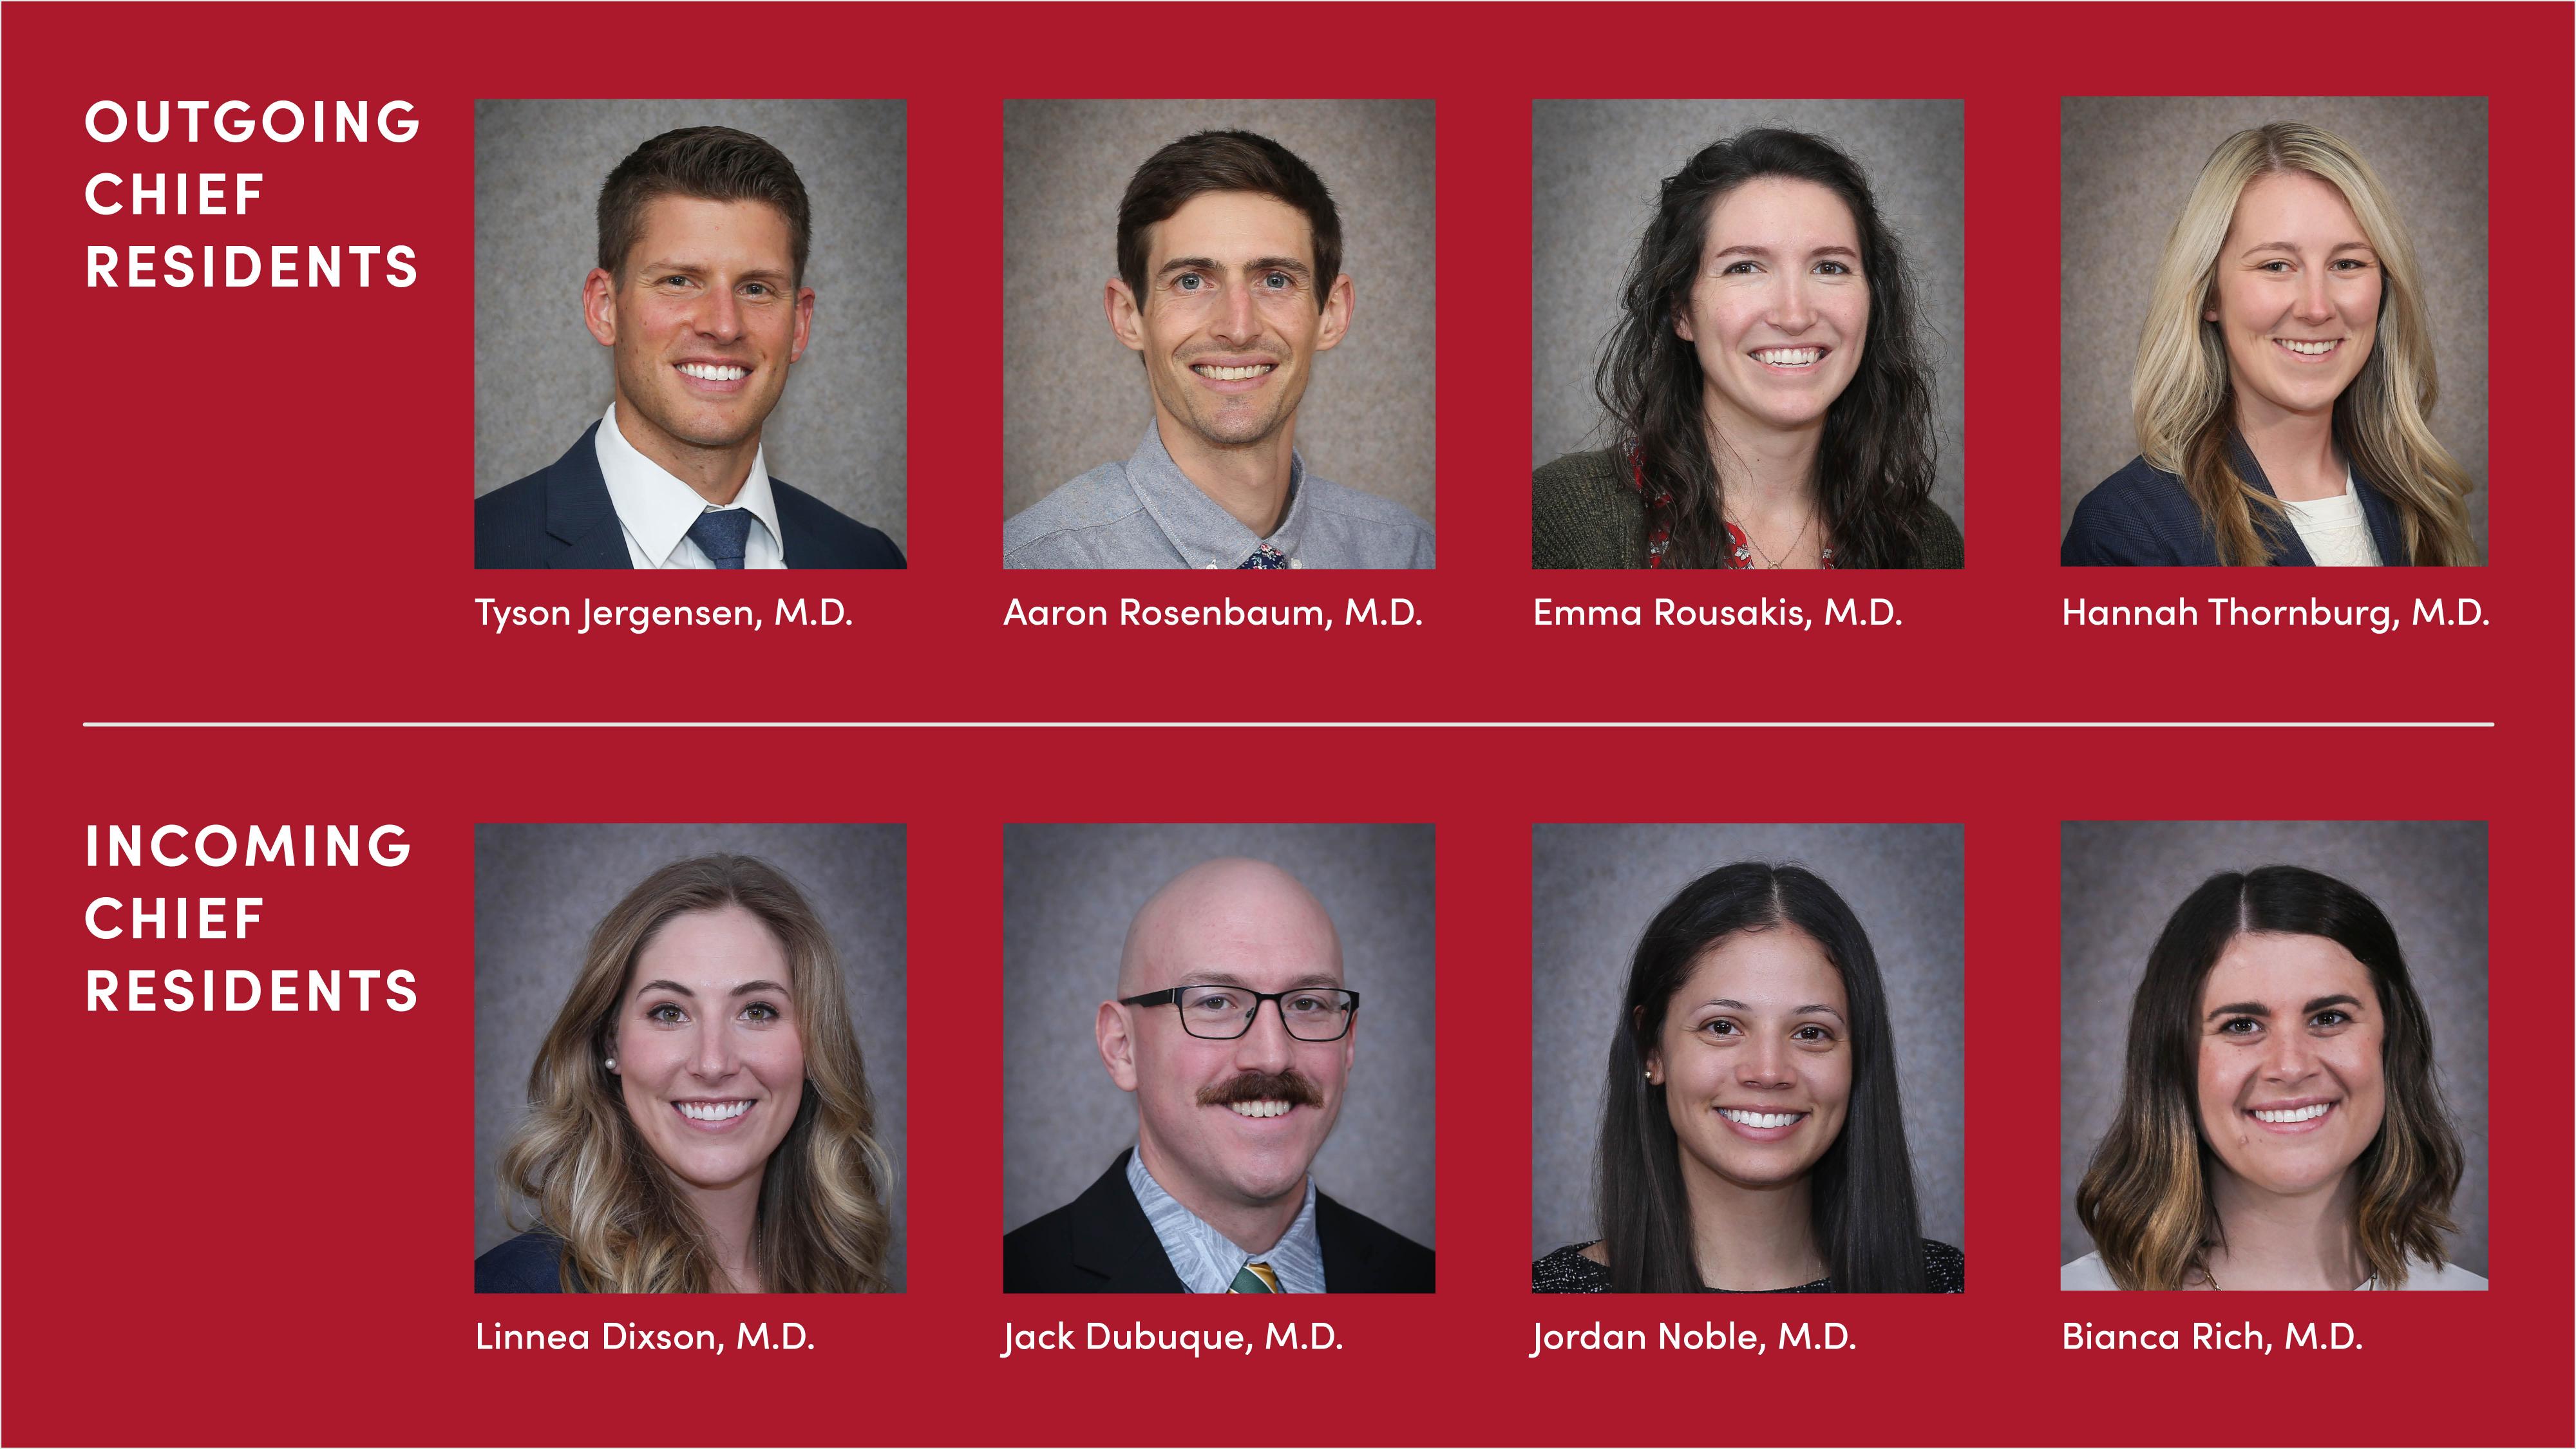 Portraits of the anesthesiology department outgoing and incoming residents.